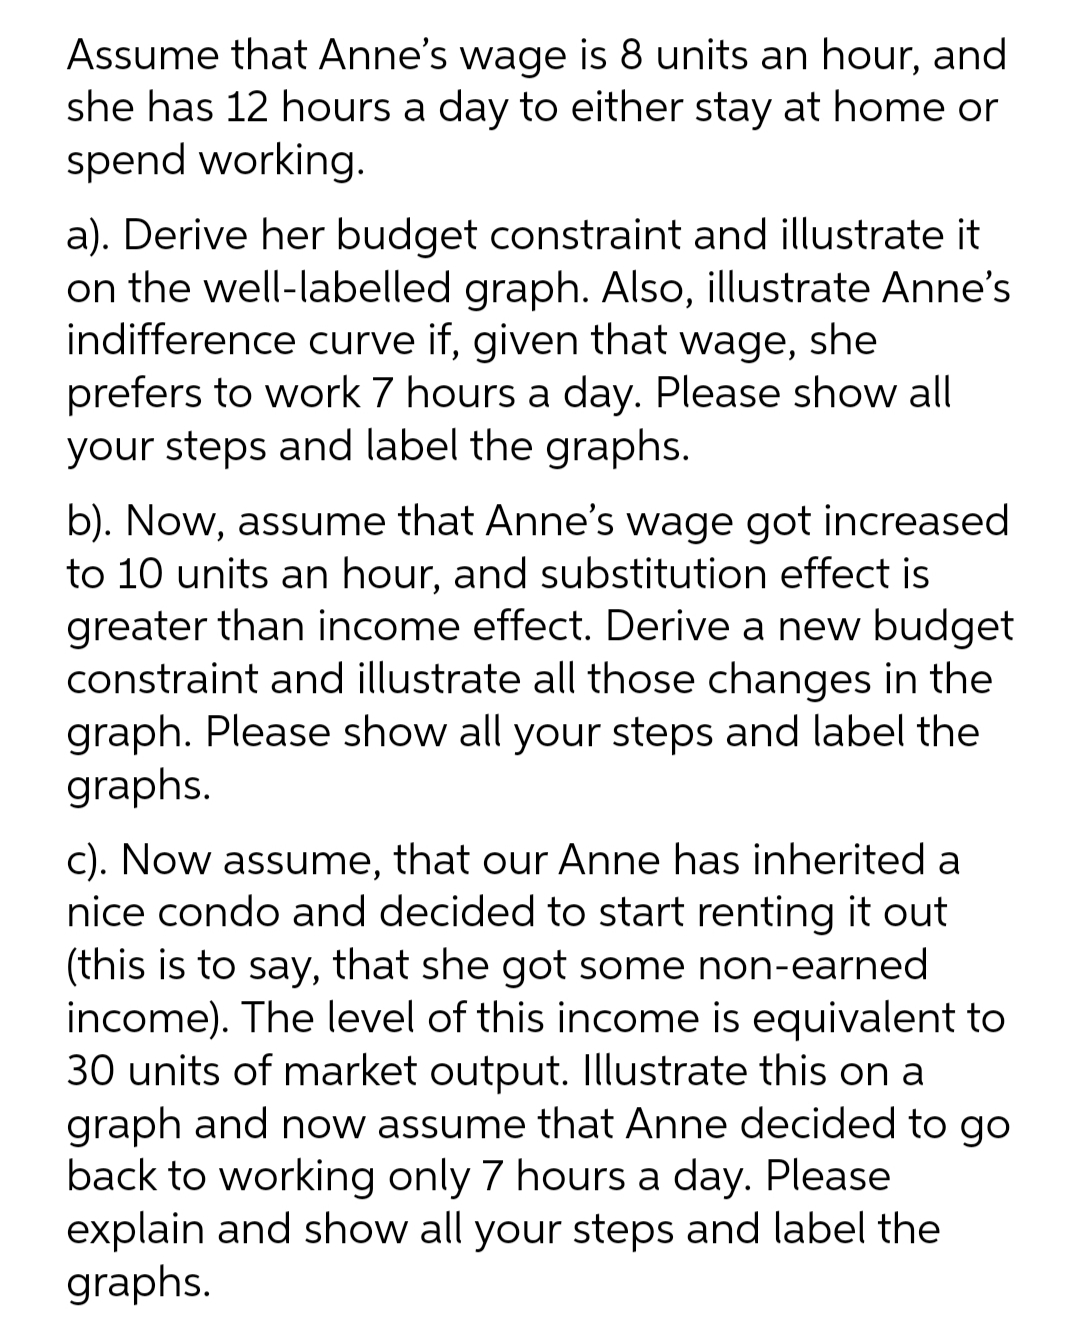 Assume that Anne's wage is 8 units an hour, and
she has 12 hours a day to either stay at home or
spend working.
a). Derive her budget constraint and illustrate it
on the well-labelled graph. Also, illustrate Anne's
indifference curve if, given that wage, she
prefers to work 7 hours a day. Please show all
your steps and label the graphs.
b). Now, assume that Anne's wage got increased
to 10 units an hour, and substitution effect is
greater than income effect. Derive a new budget
constraint and illustrate all those changes in the
graph. Please show all your steps and label the
graphs.
c). Now assume, that our Anne has inherited a
nice condo and decided to start renting it out
(this is to say, that she got some non-earned
income). The level of this income is equivalent to
30 units of market output. Illustrate this on a
graph and now assume that Anne decided to go
back to working only 7 hours a day. Please
explain and show all your steps and label the
graphs.
